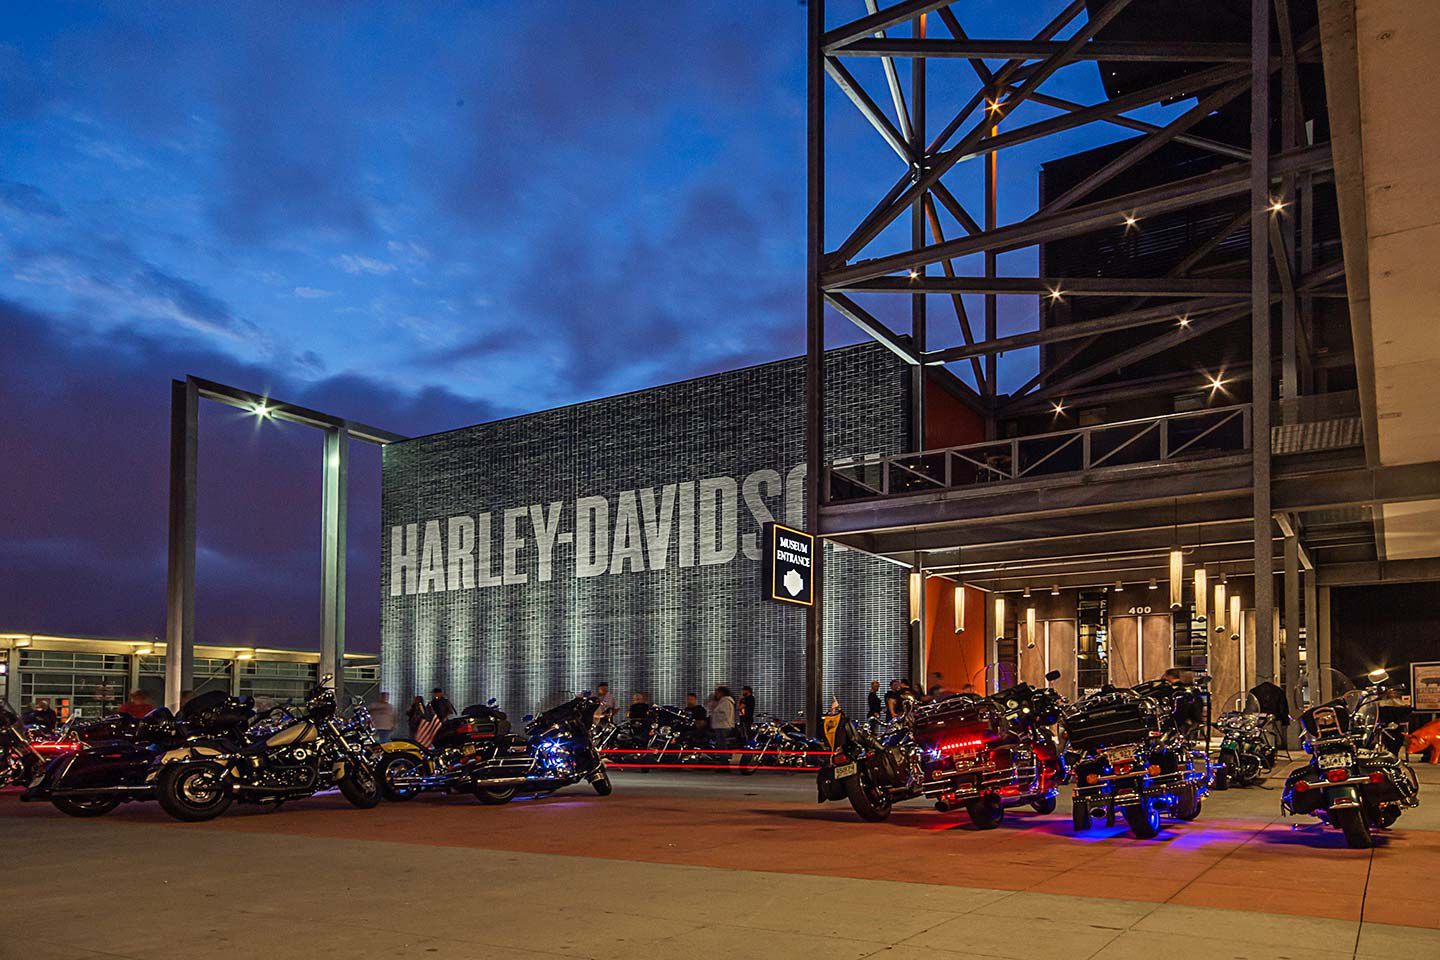 Don’t miss a tour of the awesome H-D Museum if you’re in town.